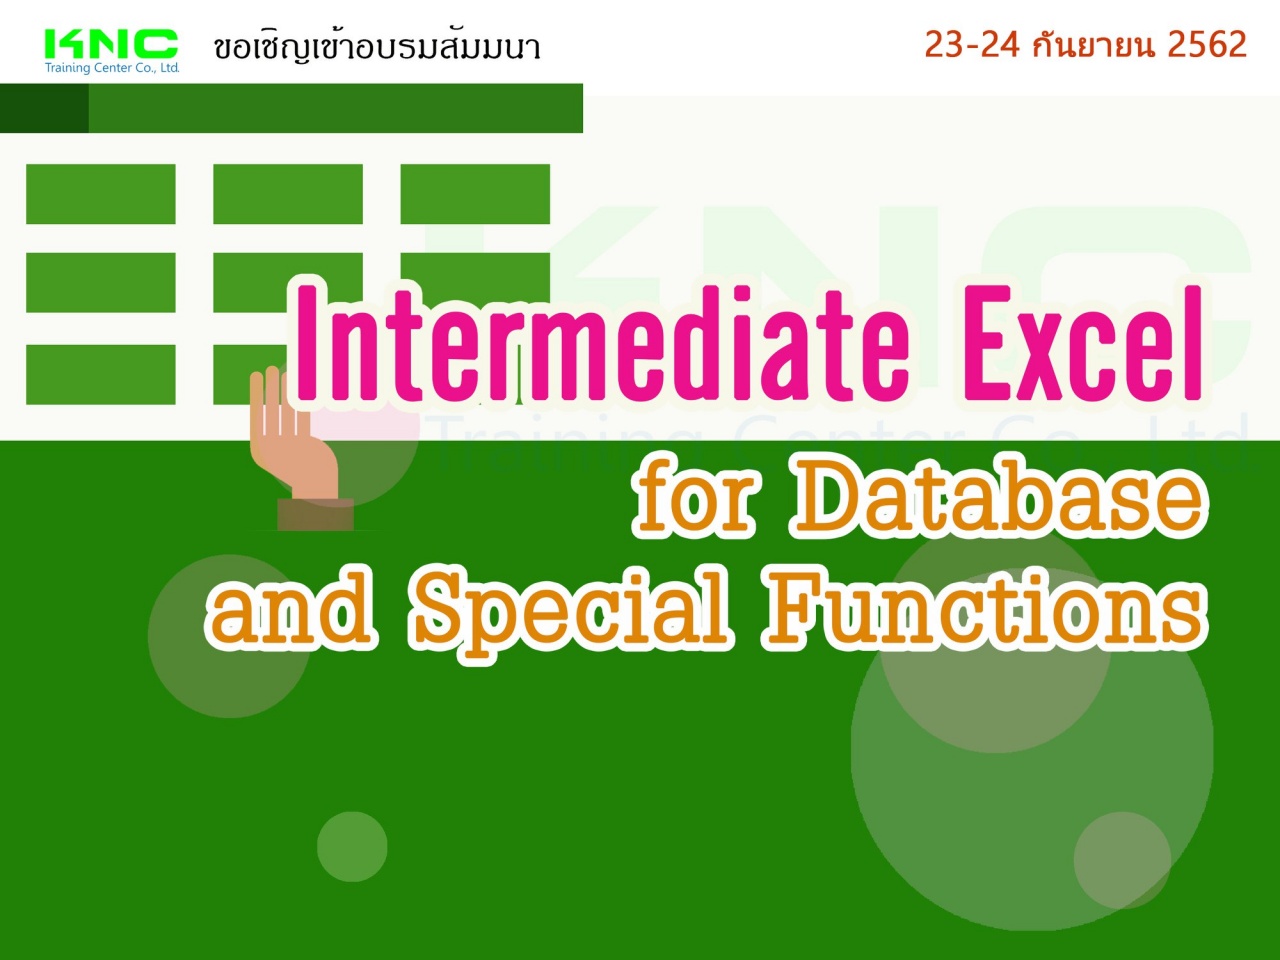 Intermediate Excel for Database and Special Functions